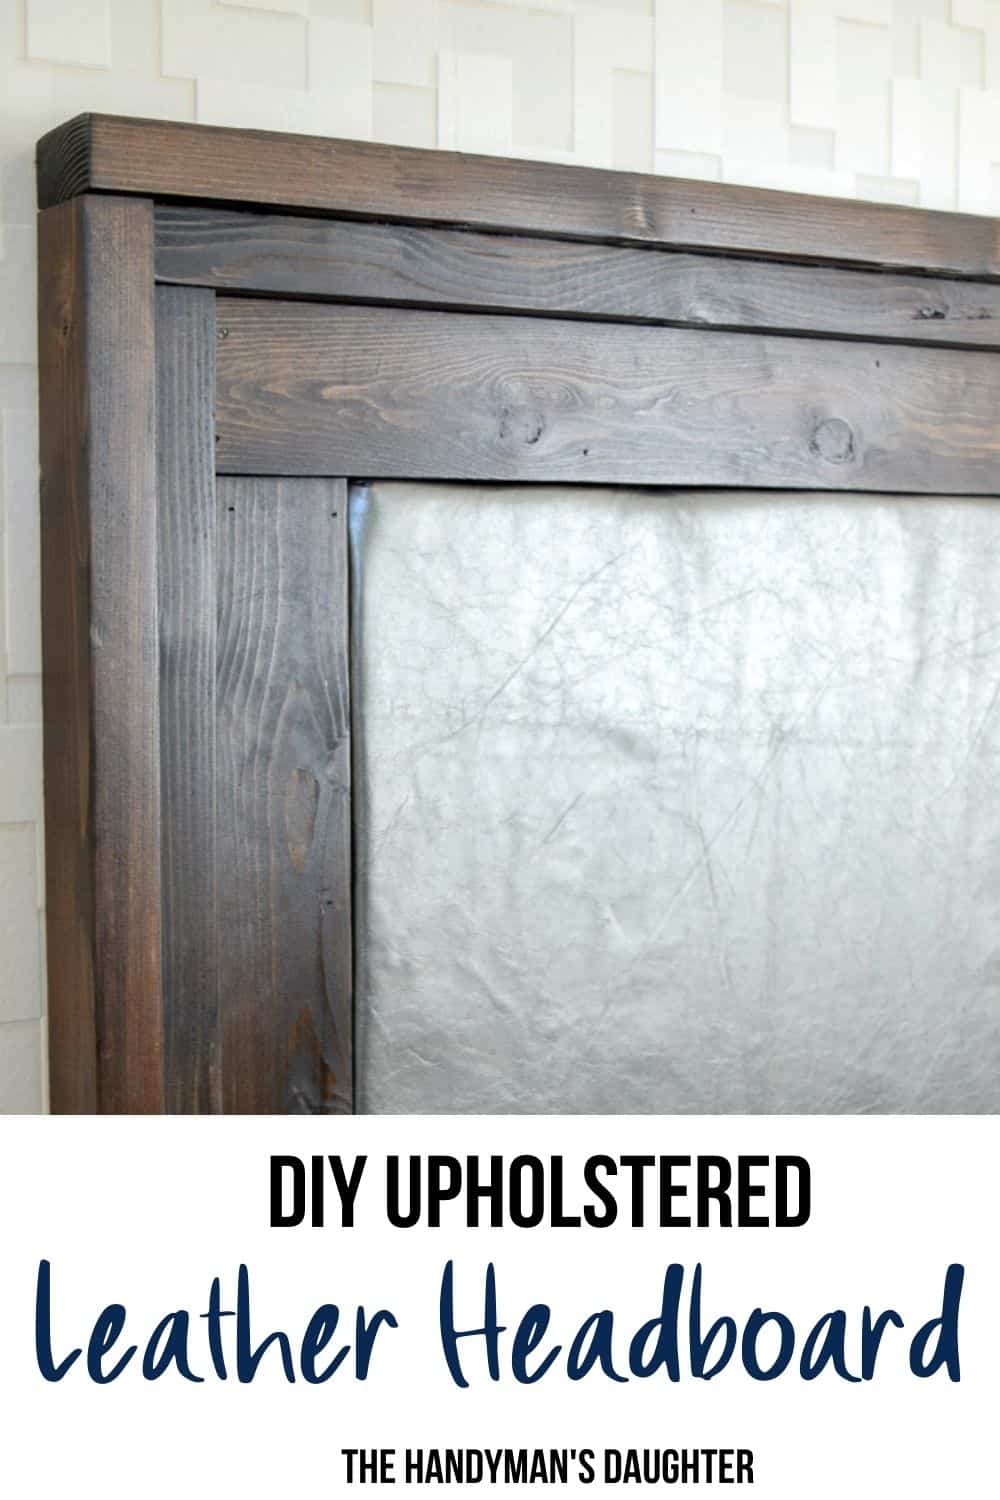 DIY upholstered headboard with wood frame